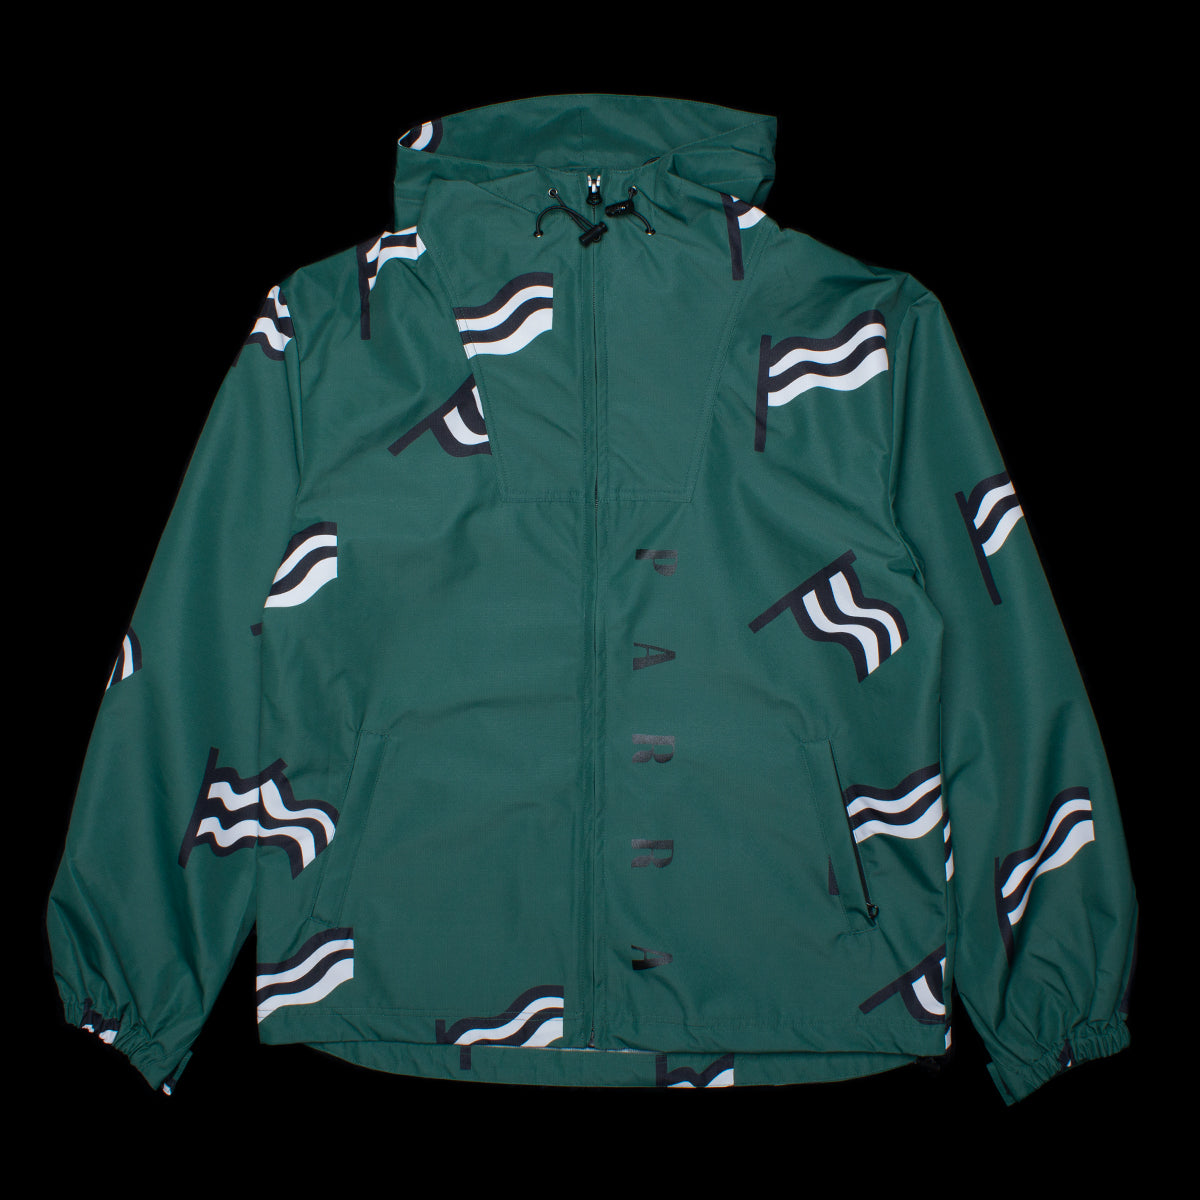 by Parra Flagged Jacket 